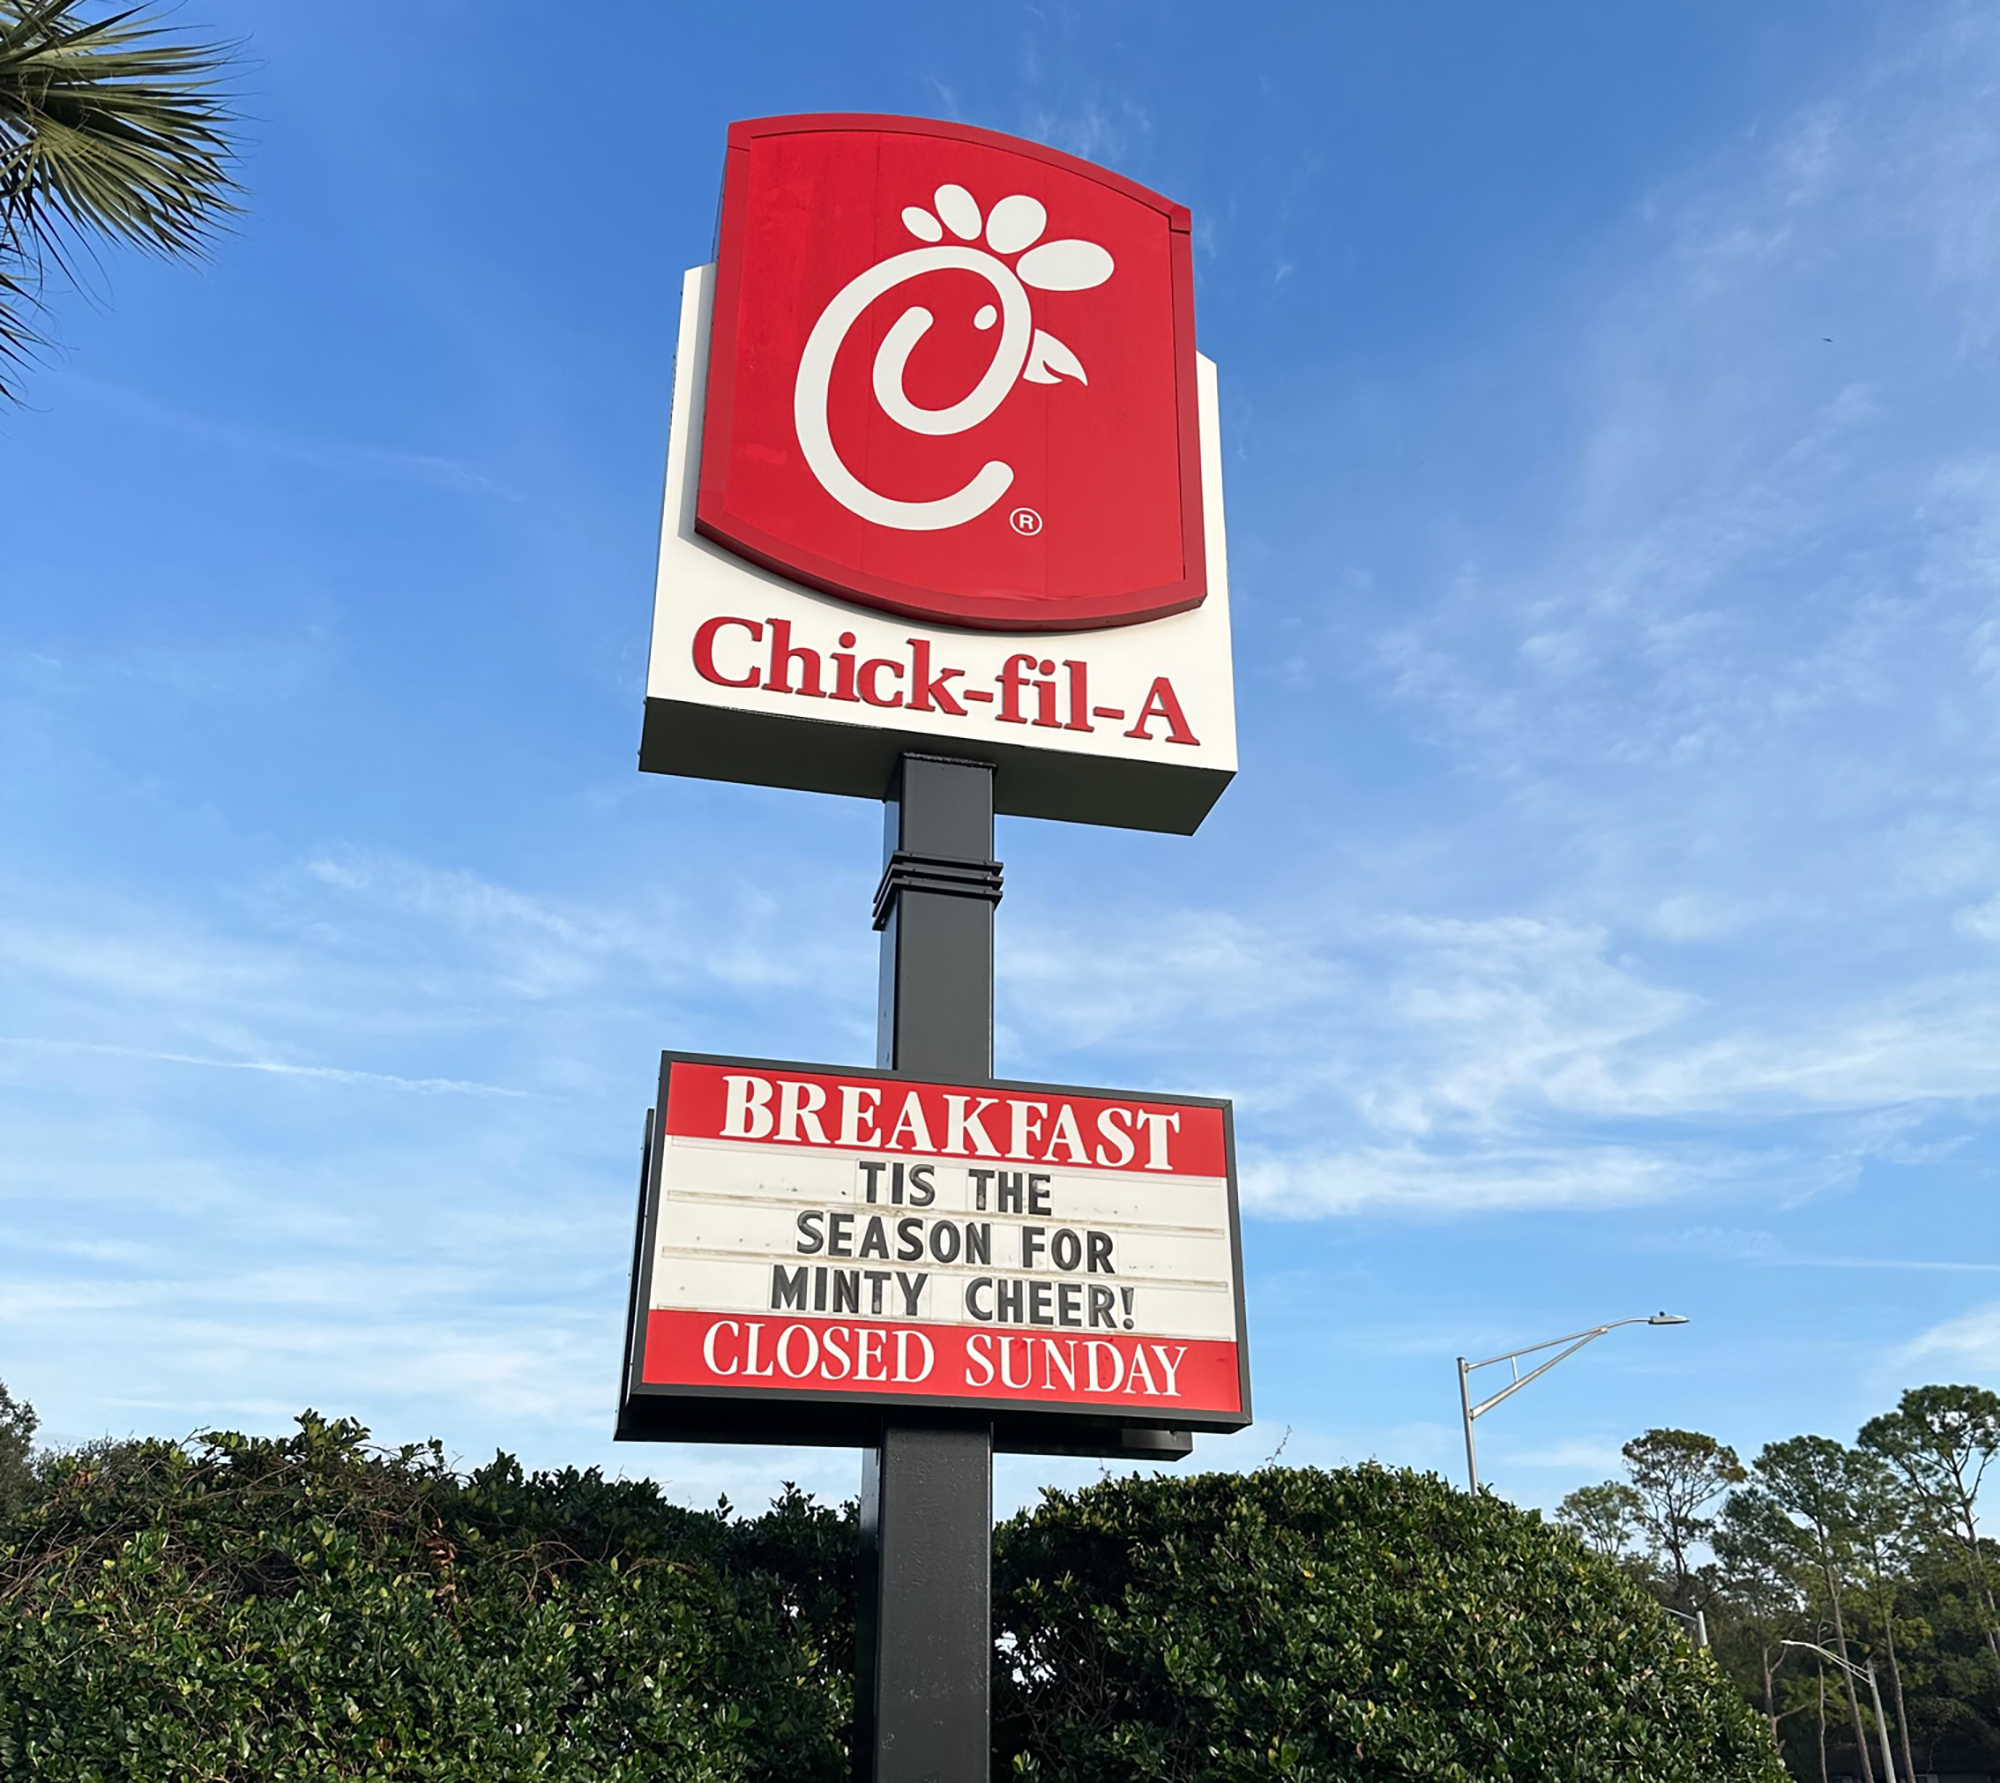 Chick-fil-A has at least 23 locations in Northeast Florida.